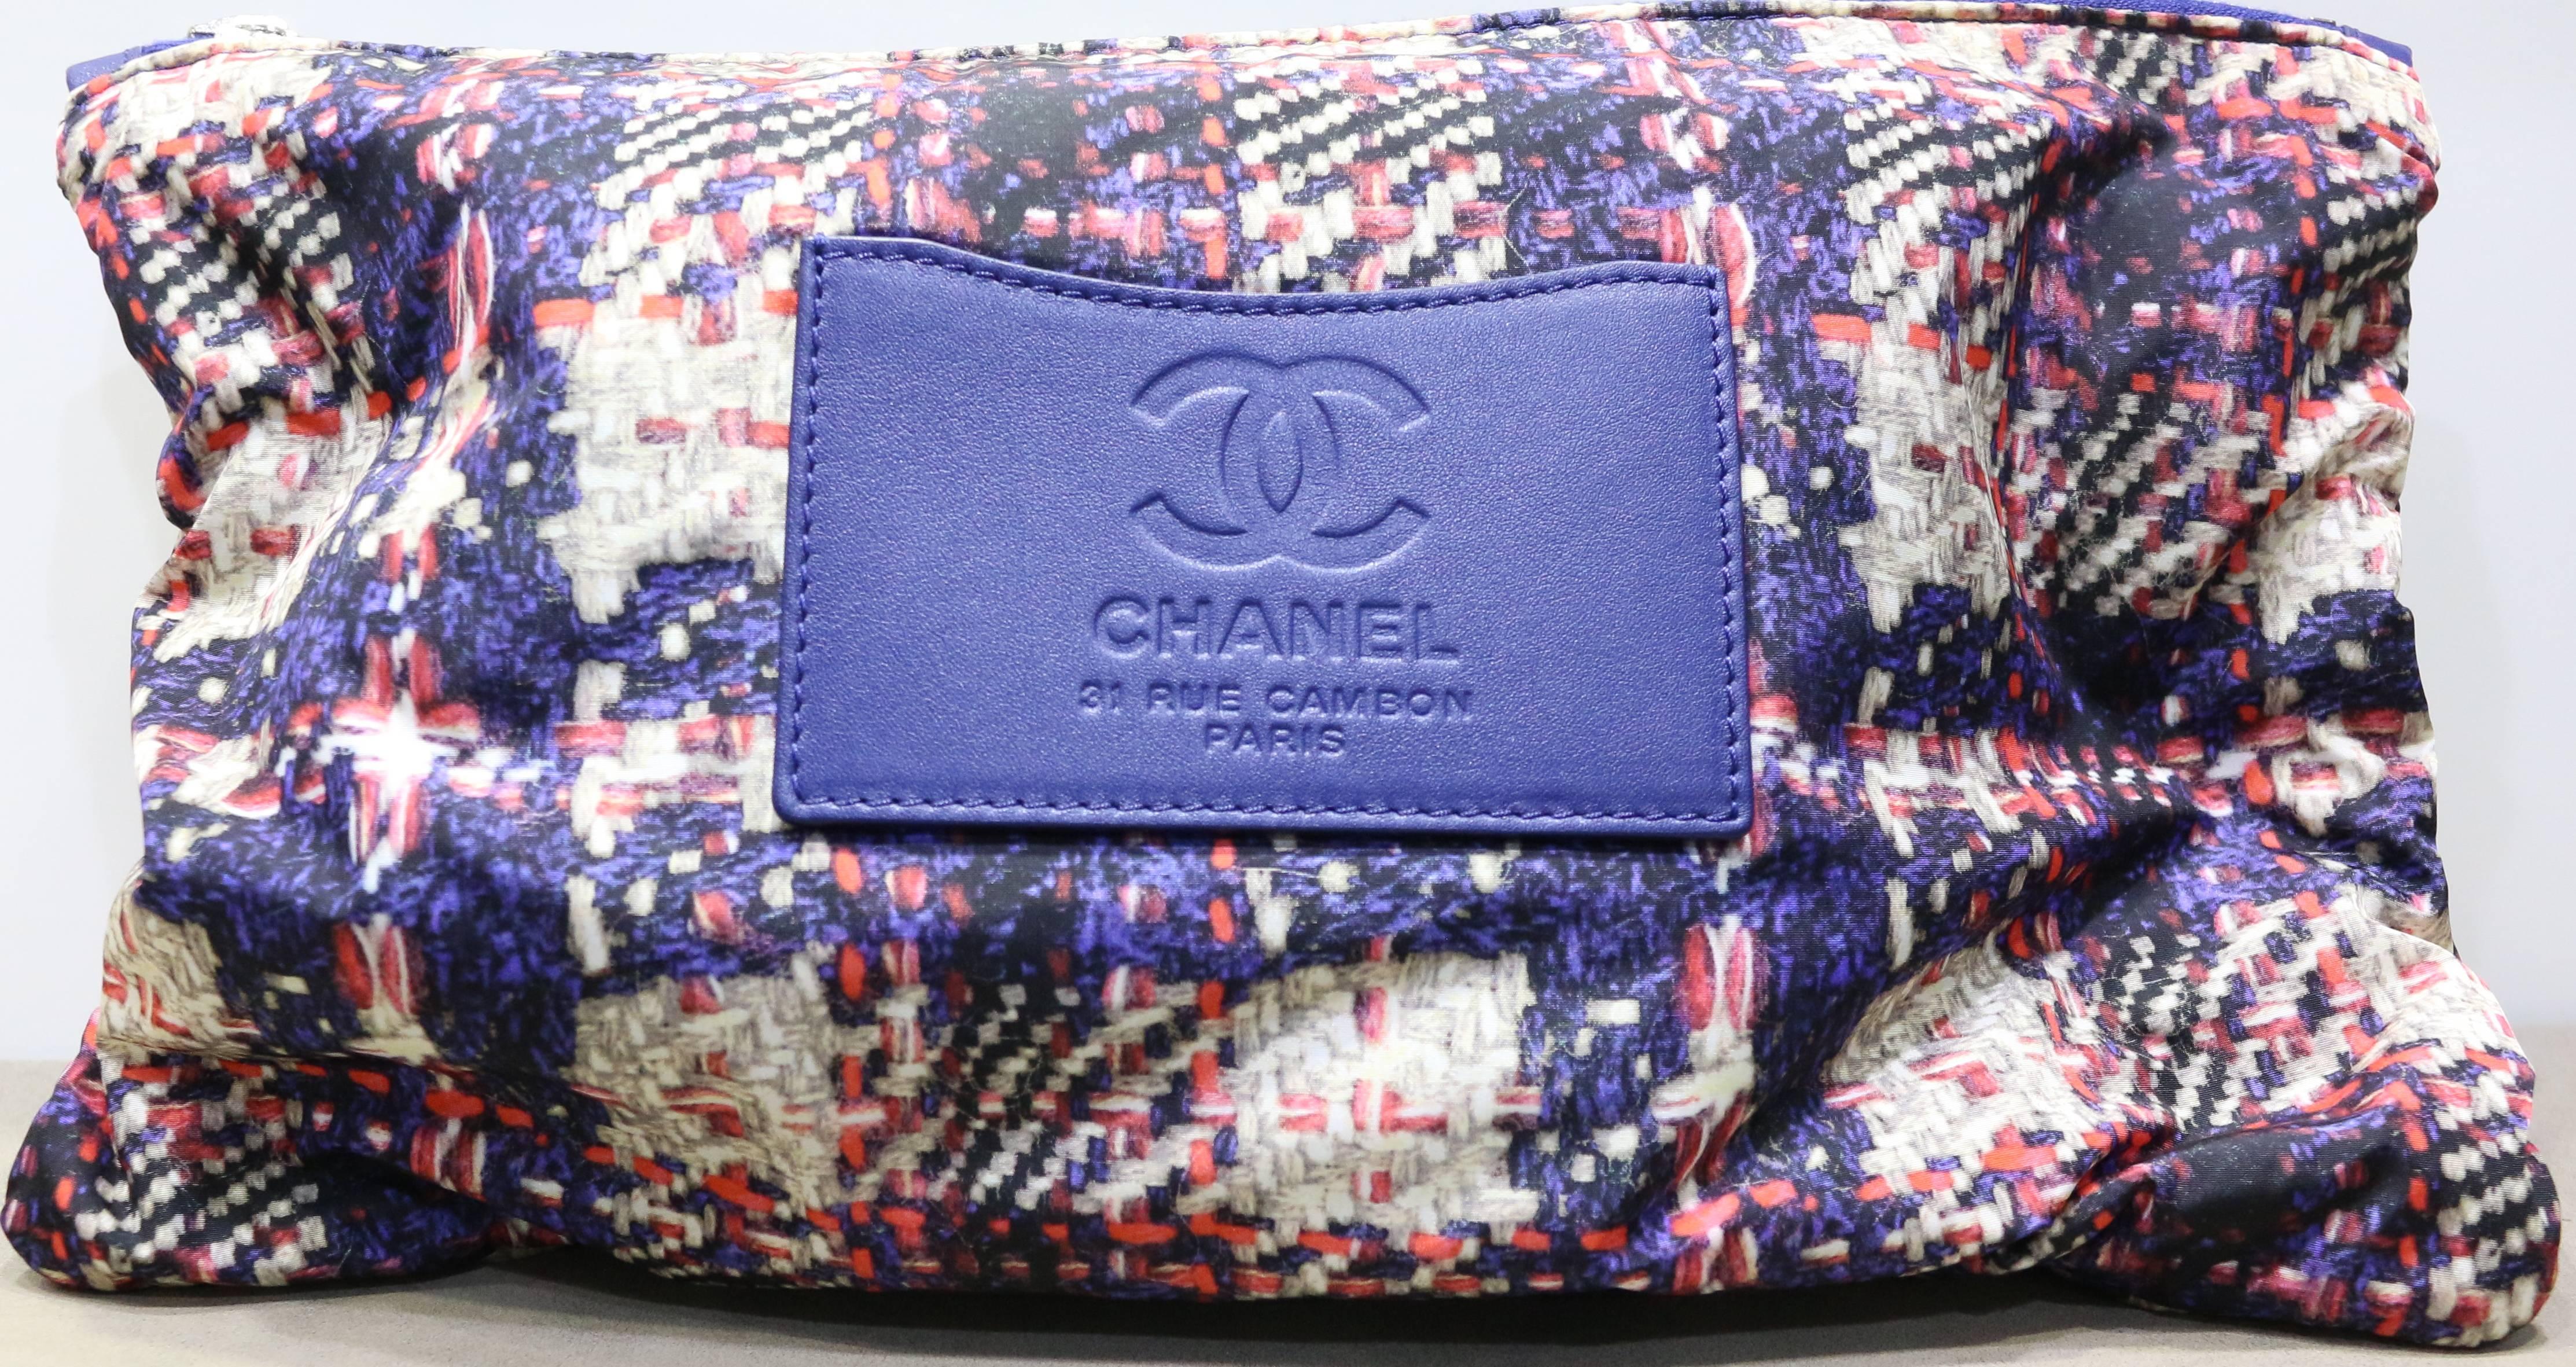 - Chanel red/white/blue check pattern nylon shoulder bag. Featuring a blue leather silver hardware chain strap, a silver hardware "CC" interlock closure. The bag comes with a same pattern pouch bag. A blue nylon interior with zipper. This